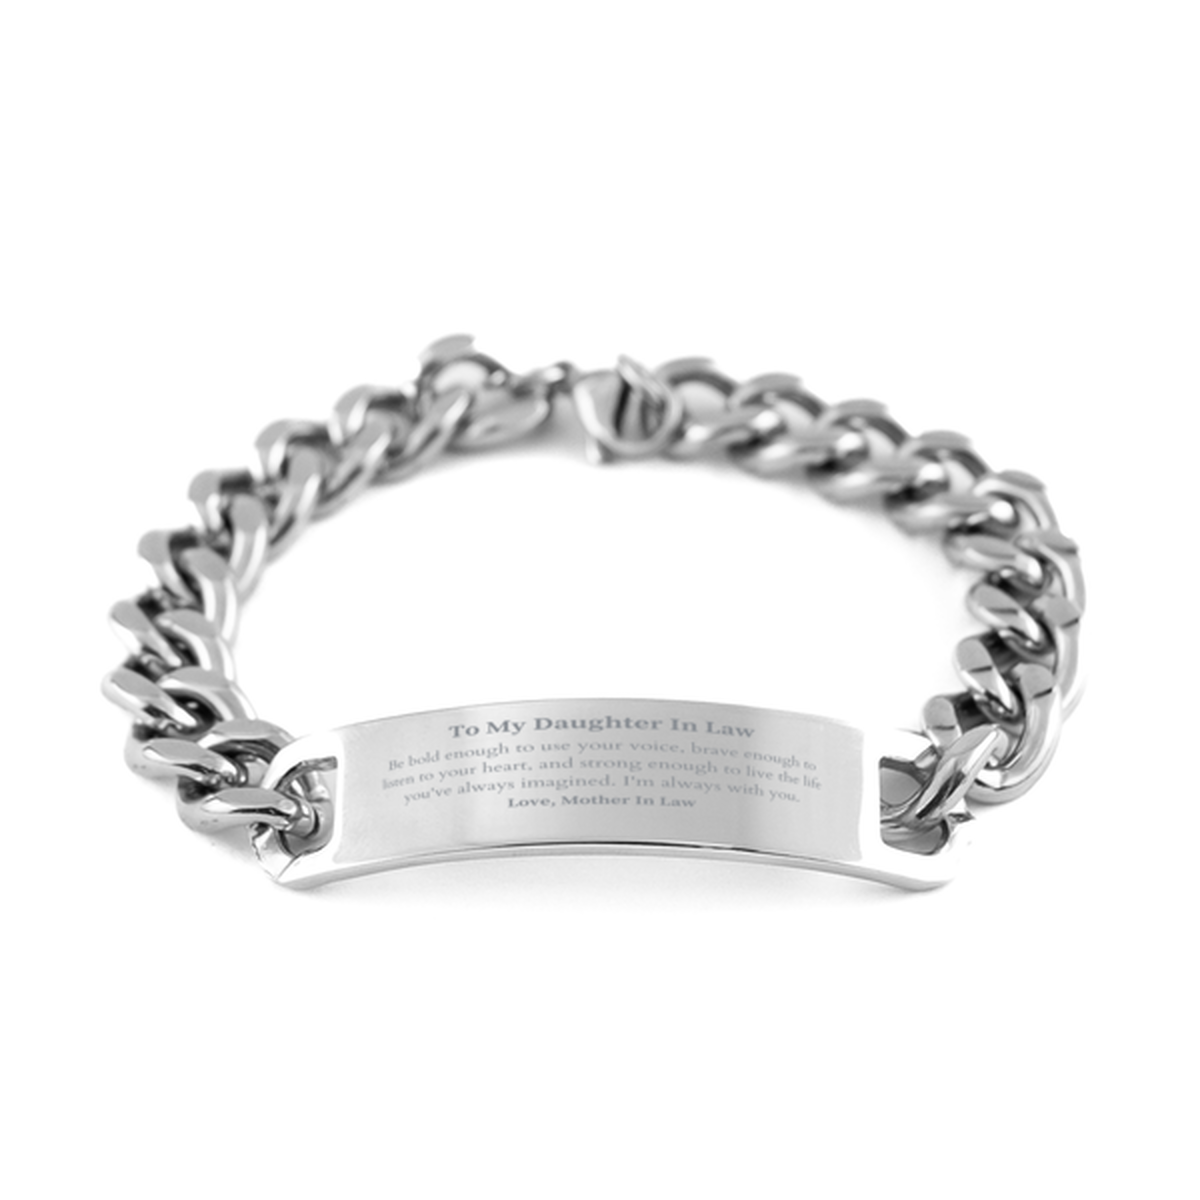 Keepsake Daughter In Law Cuban Chain Stainless Steel Bracelet Gift Idea Graduation Christmas Birthday Daughter In Law from Mother In Law, Daughter In Law Be bold enough to use your voice, brave enough to listen to your heart. Love, Mother In Law